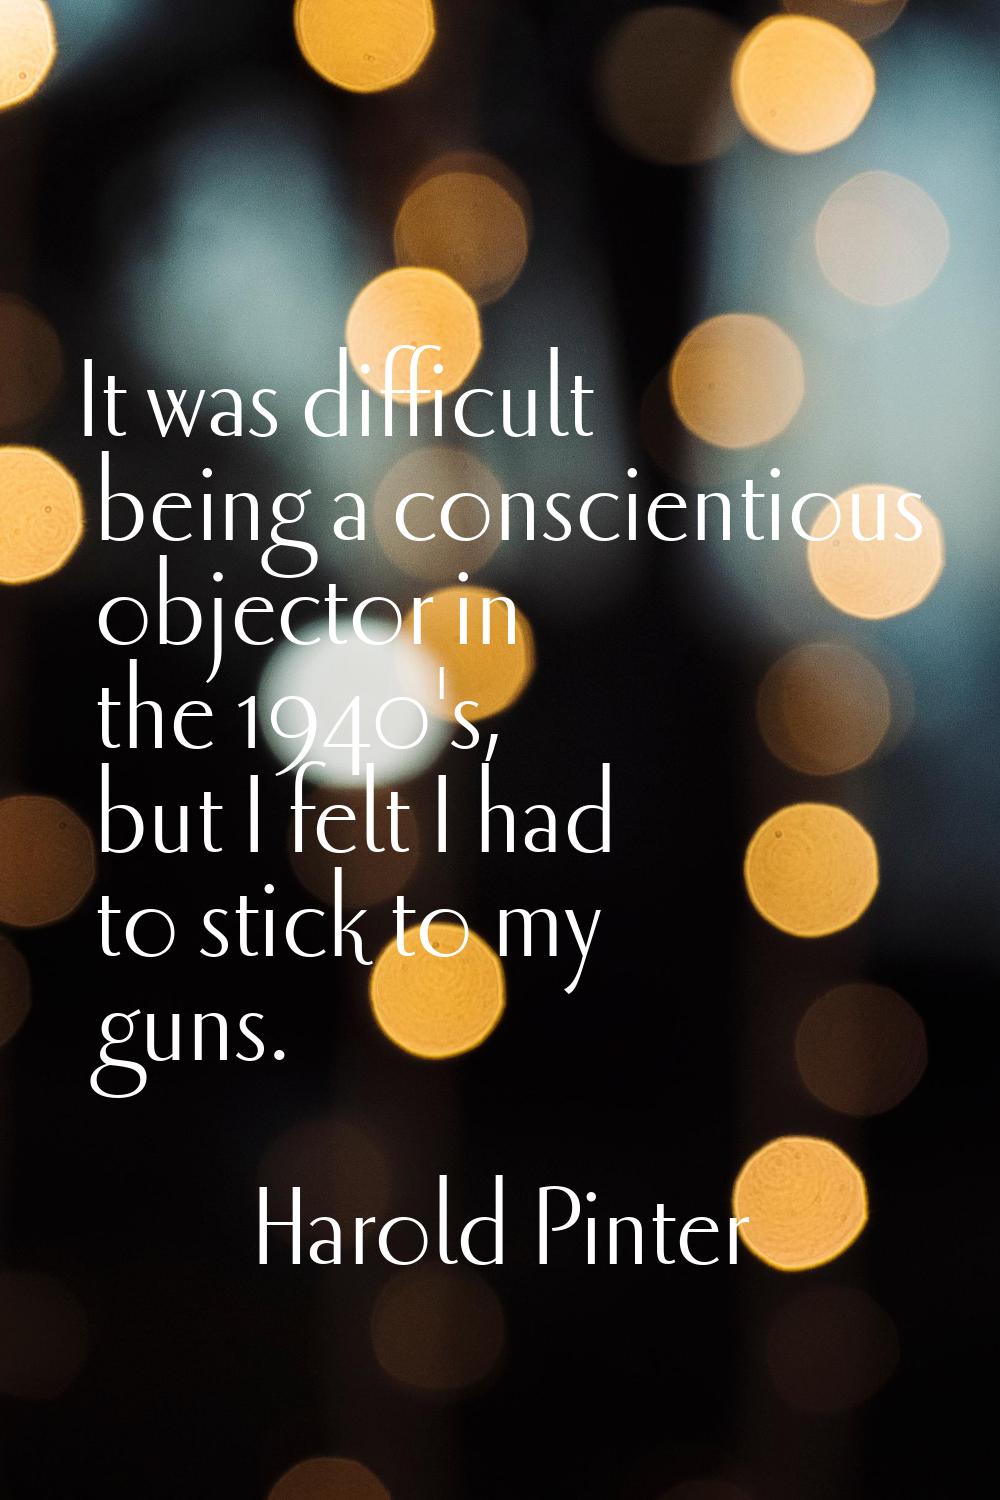 It was difficult being a conscientious objector in the 1940's, but I felt I had to stick to my guns